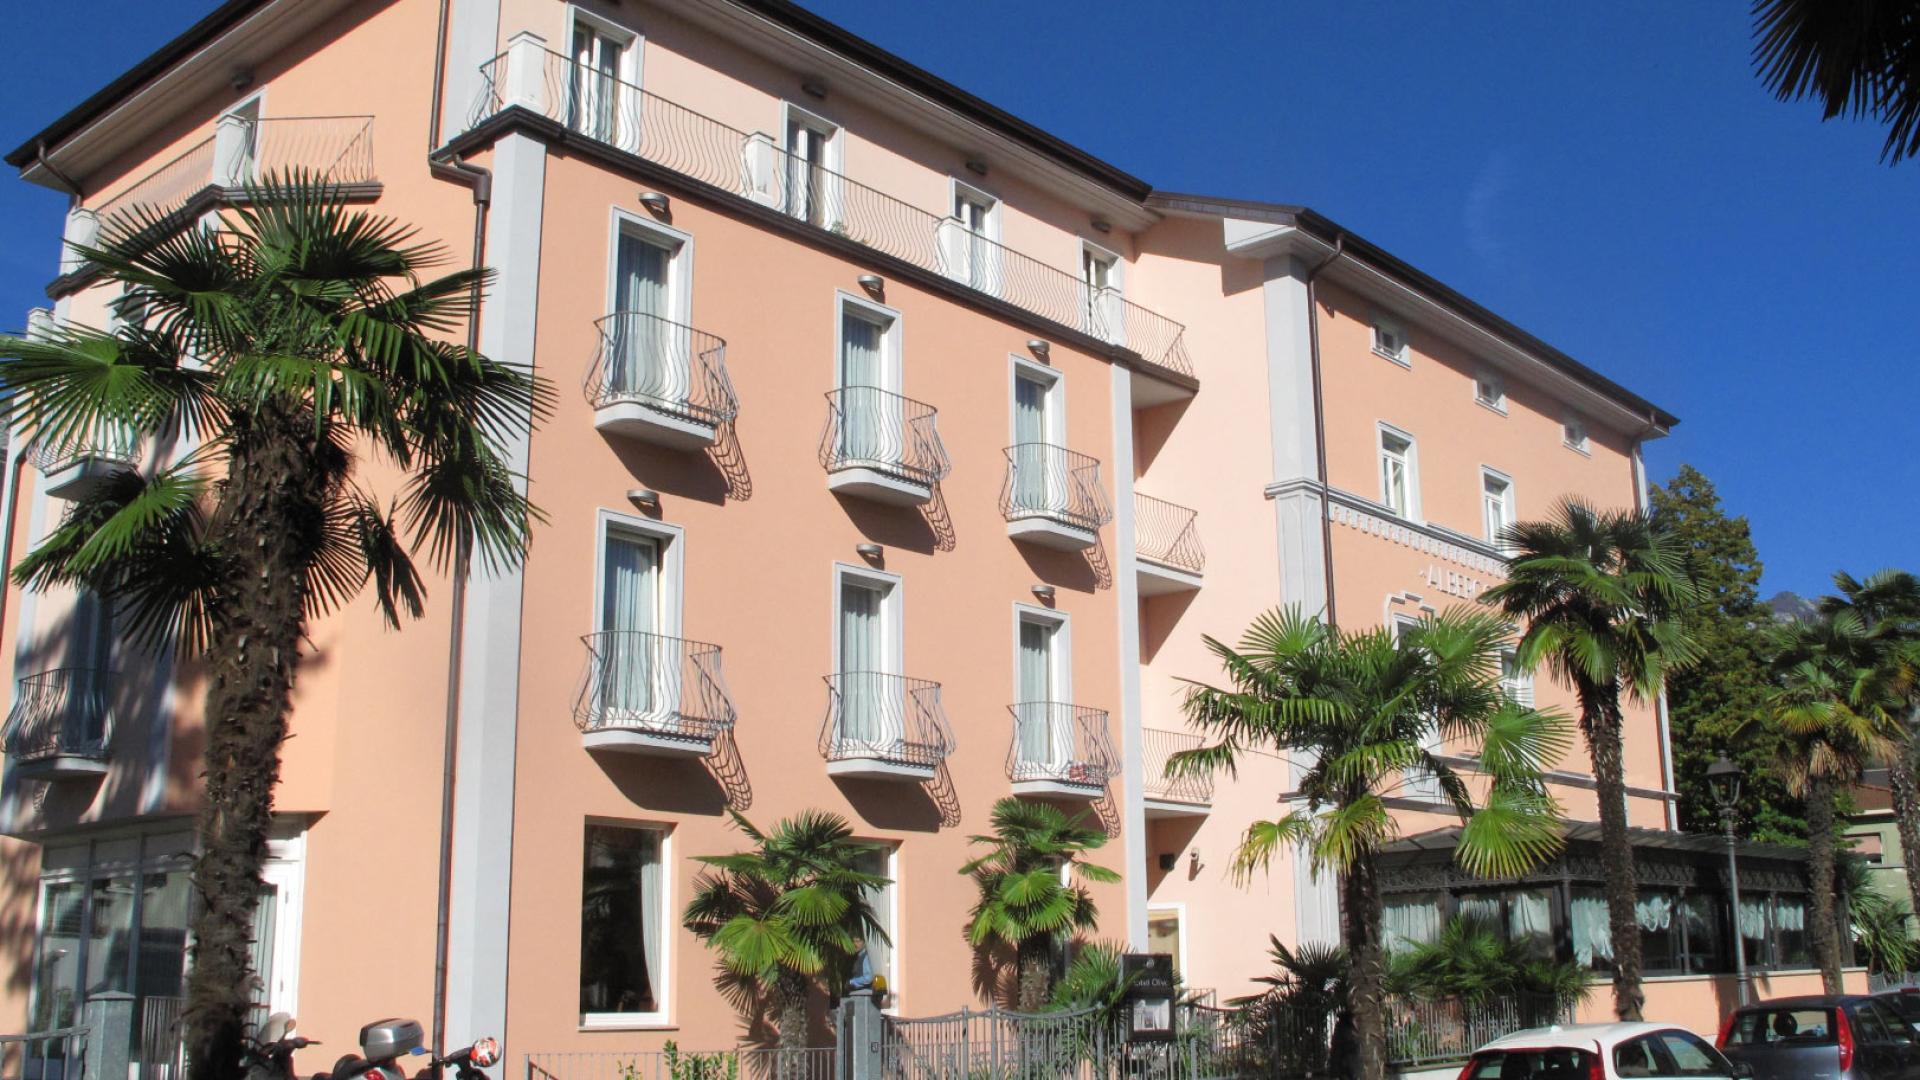 hotelolivo.upgarda en book-early-and-get-a-15-discount-for-your-holiday-in-the-upper-garda-region 012